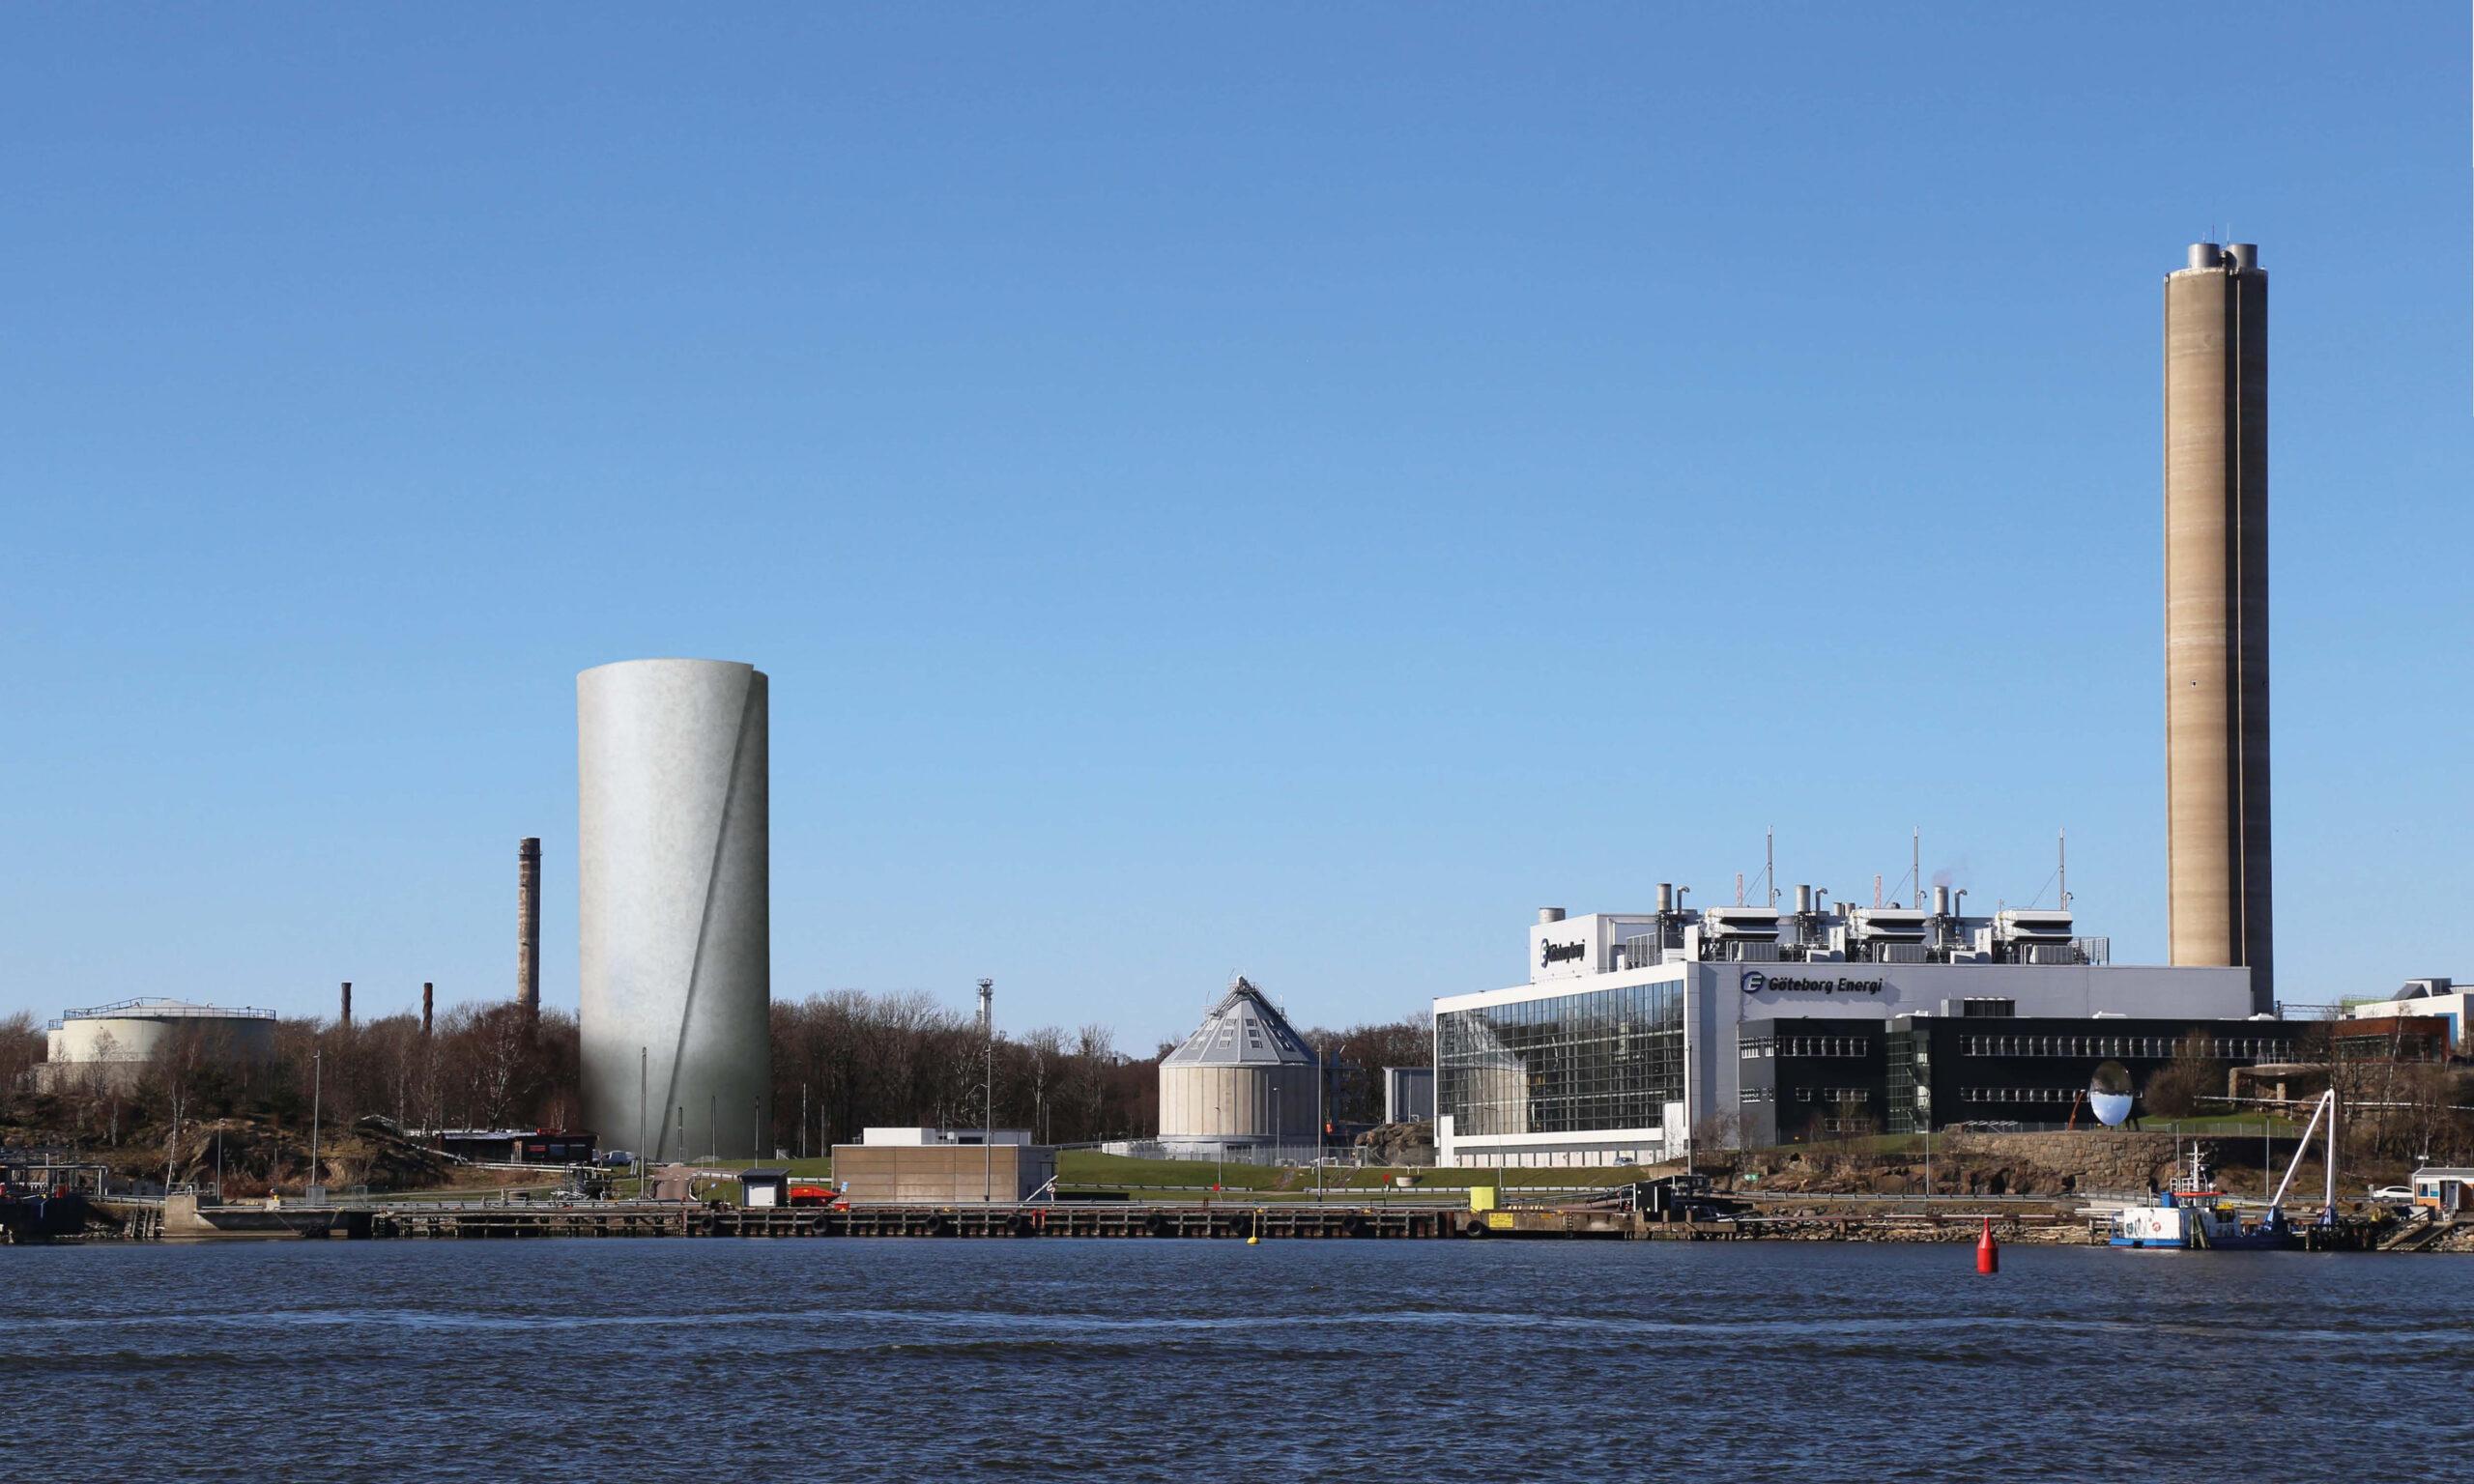 A distric heating facility in Gothenburg, a tall and wide tower to the left; a tall and slim tower to the right.